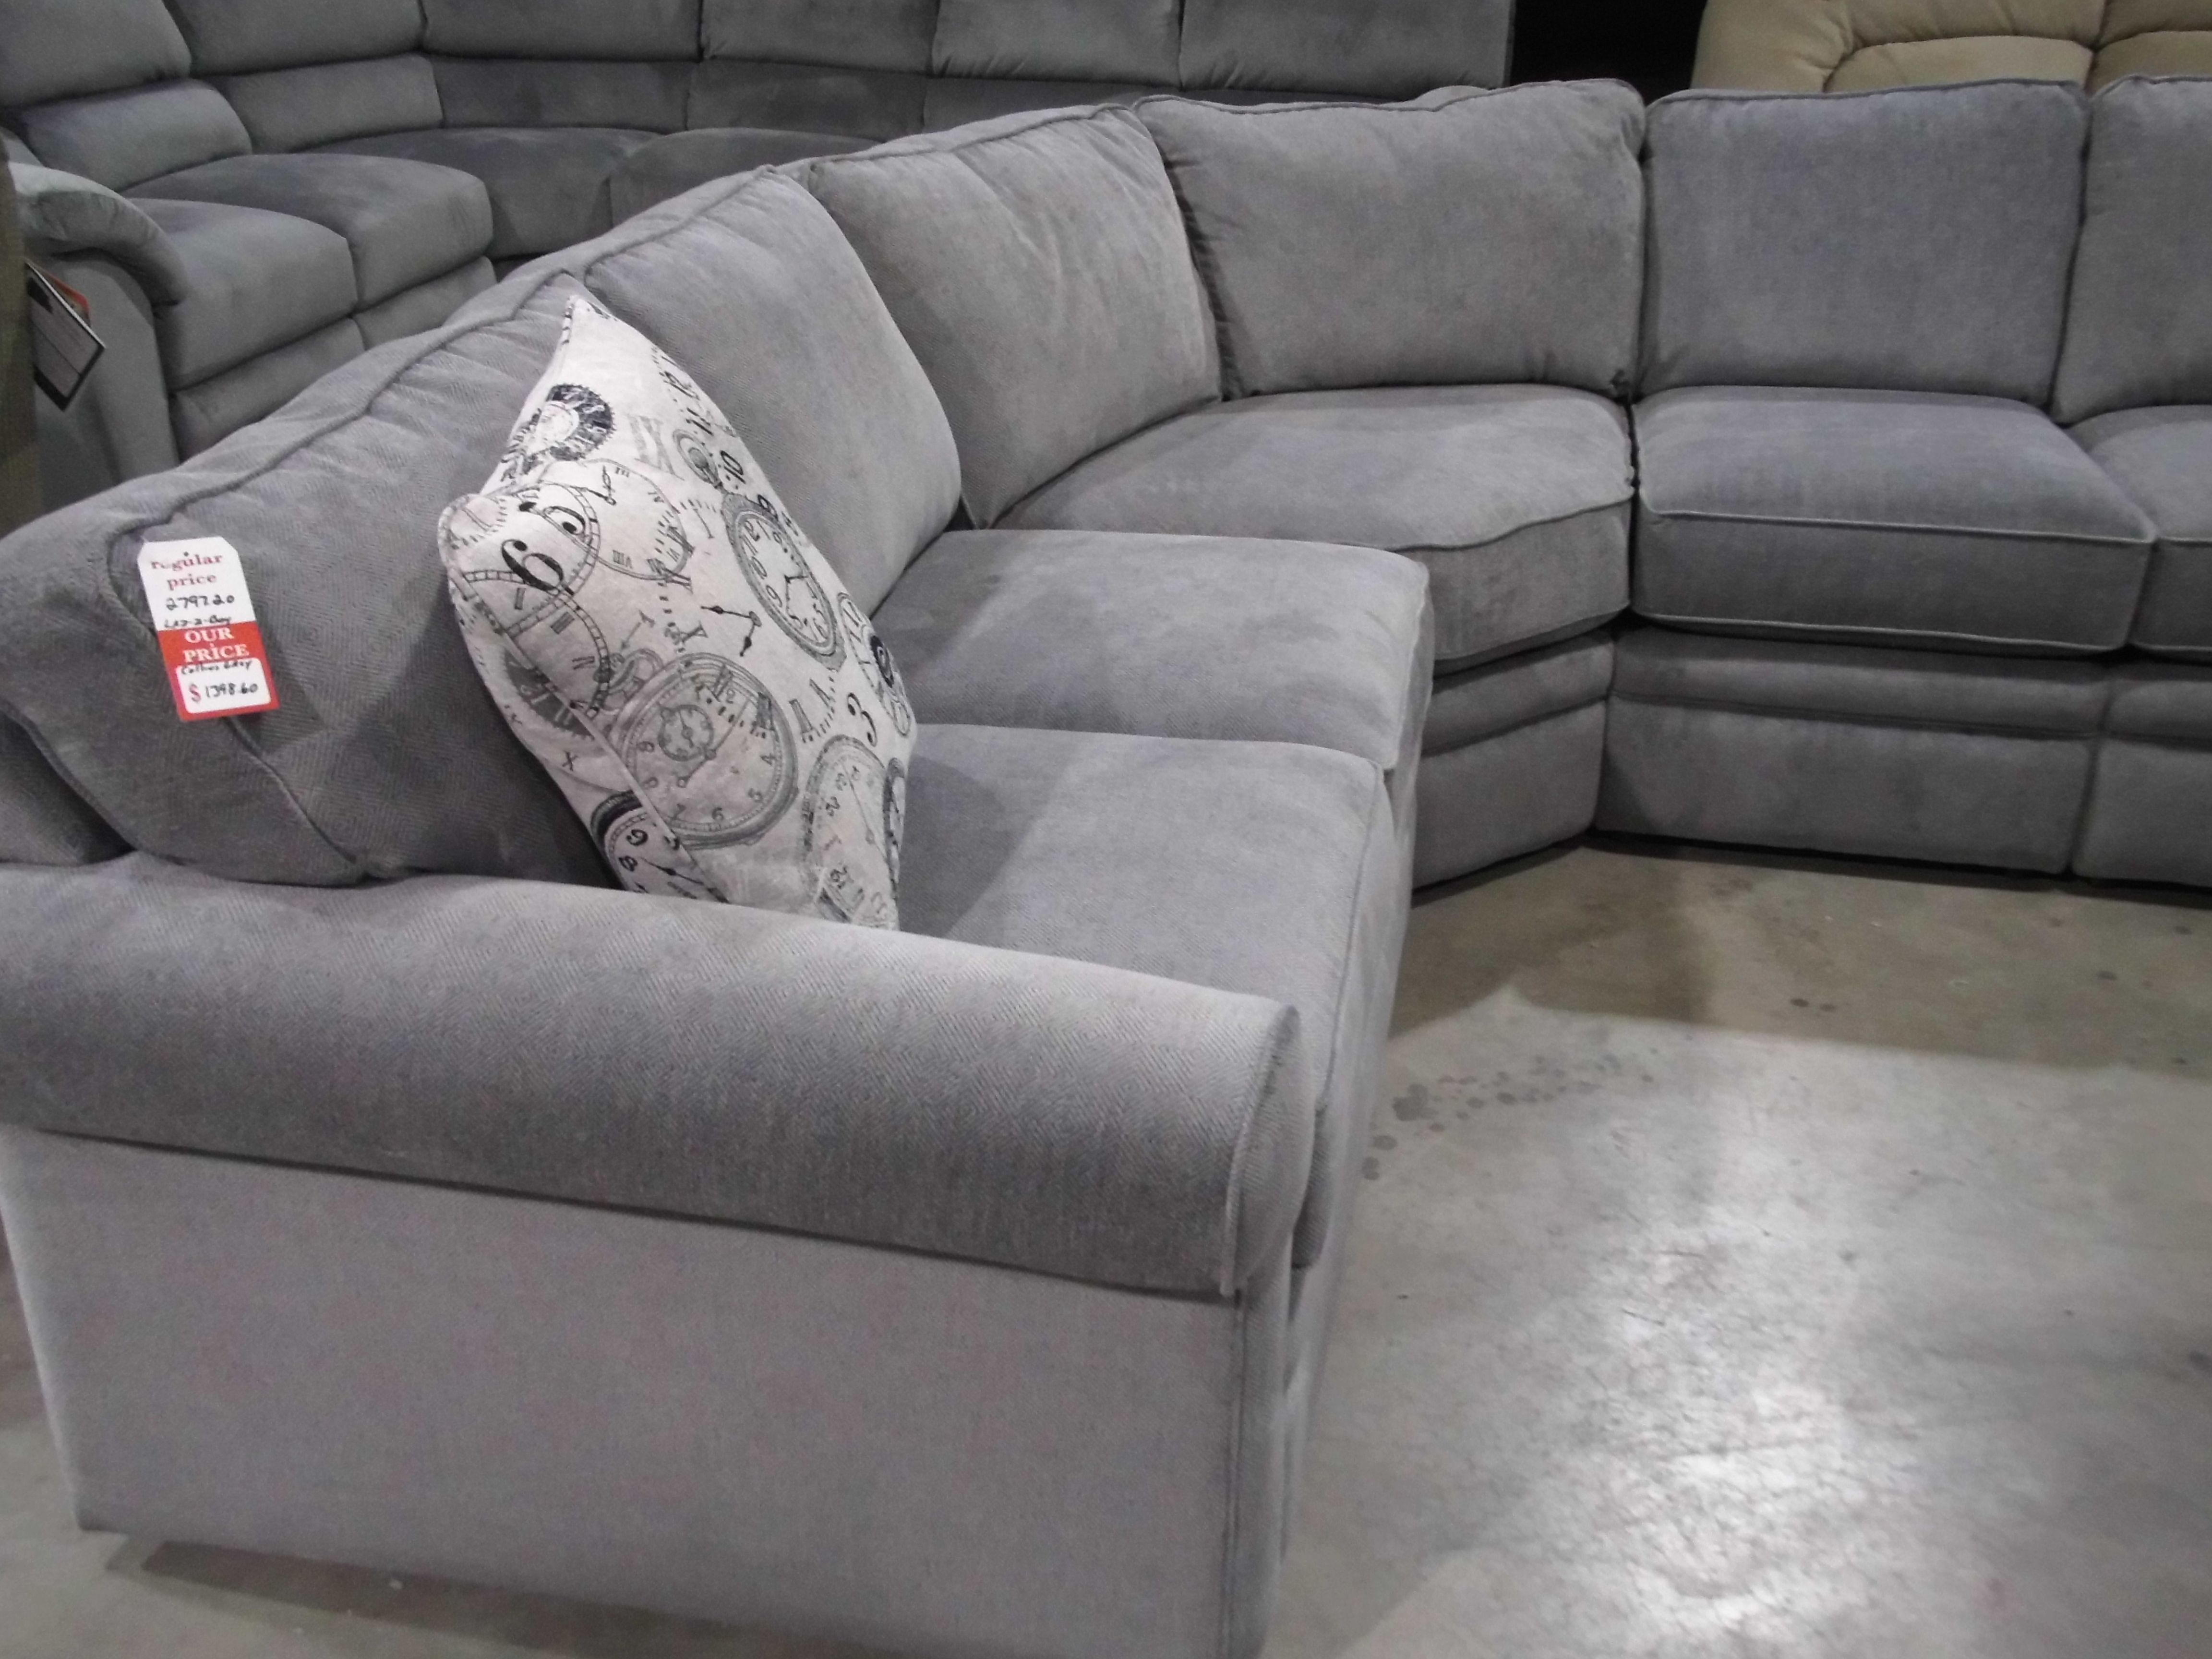 Lazy Boy Sectional Sleeper Sofa – Nrhcares For La Z Boy Sectional Sofas (View 9 of 10)